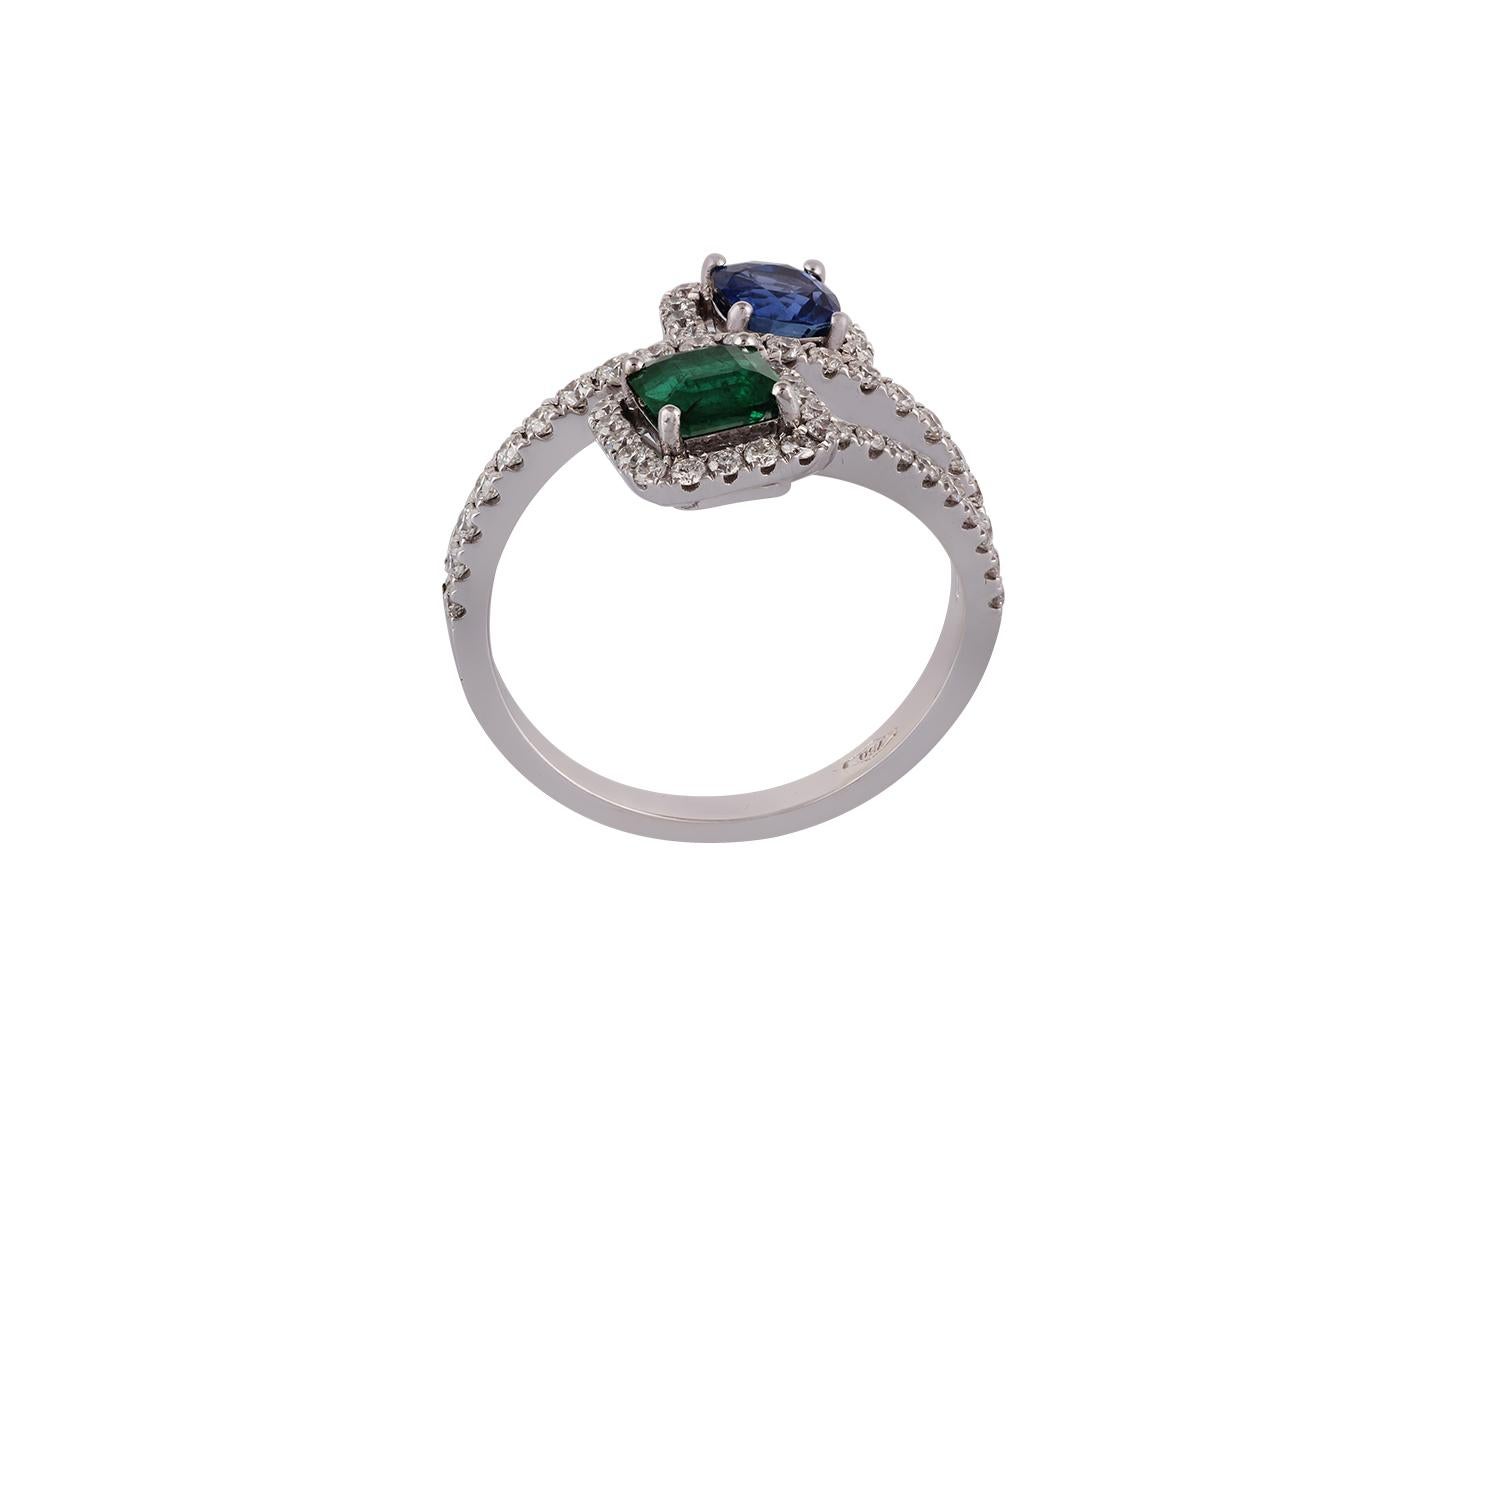 This is an elegant ring studded in 18K white gold features emerald, sapphires & diamonds, the combined weight of emerald & sapphire is 1.02 carats, the ring contains a cluster of diamonds around emerald & sapphire some diamonds are on the shank also